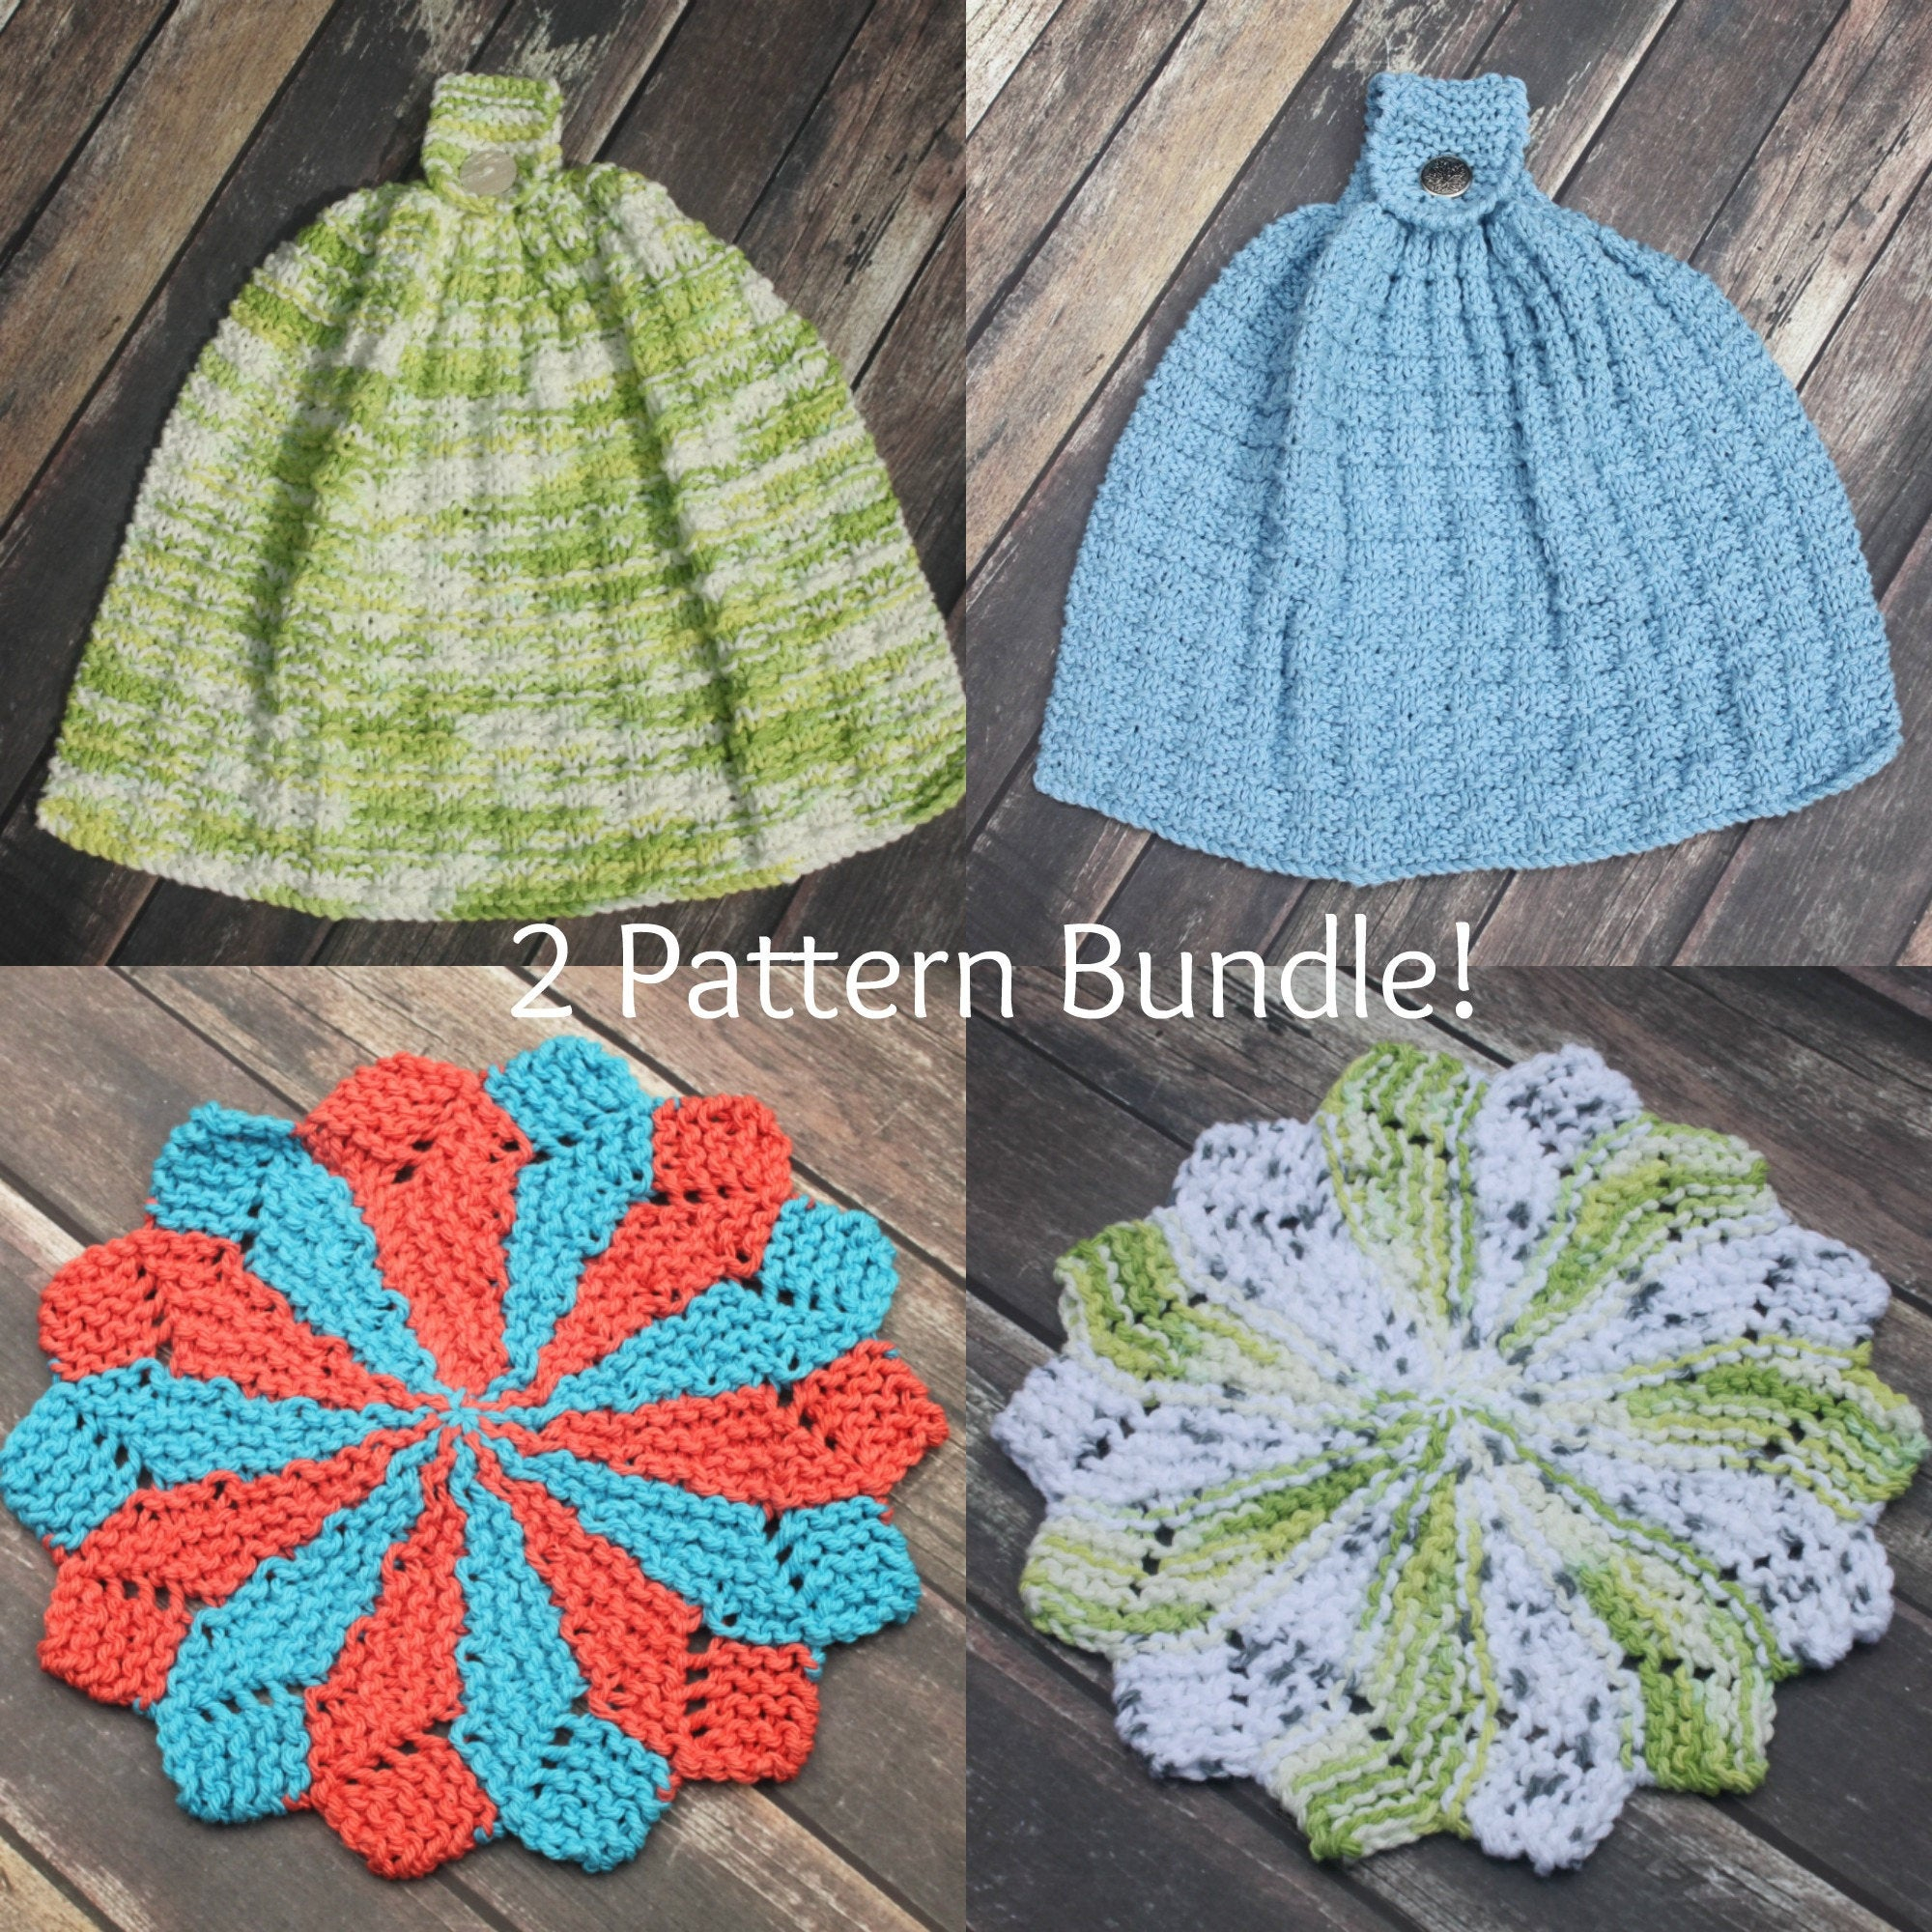 Knitted Hand Towel Patterns 2 Pattern Bundle Knit Towel And Knit Dishcloth Pdf Instant Download Patterns